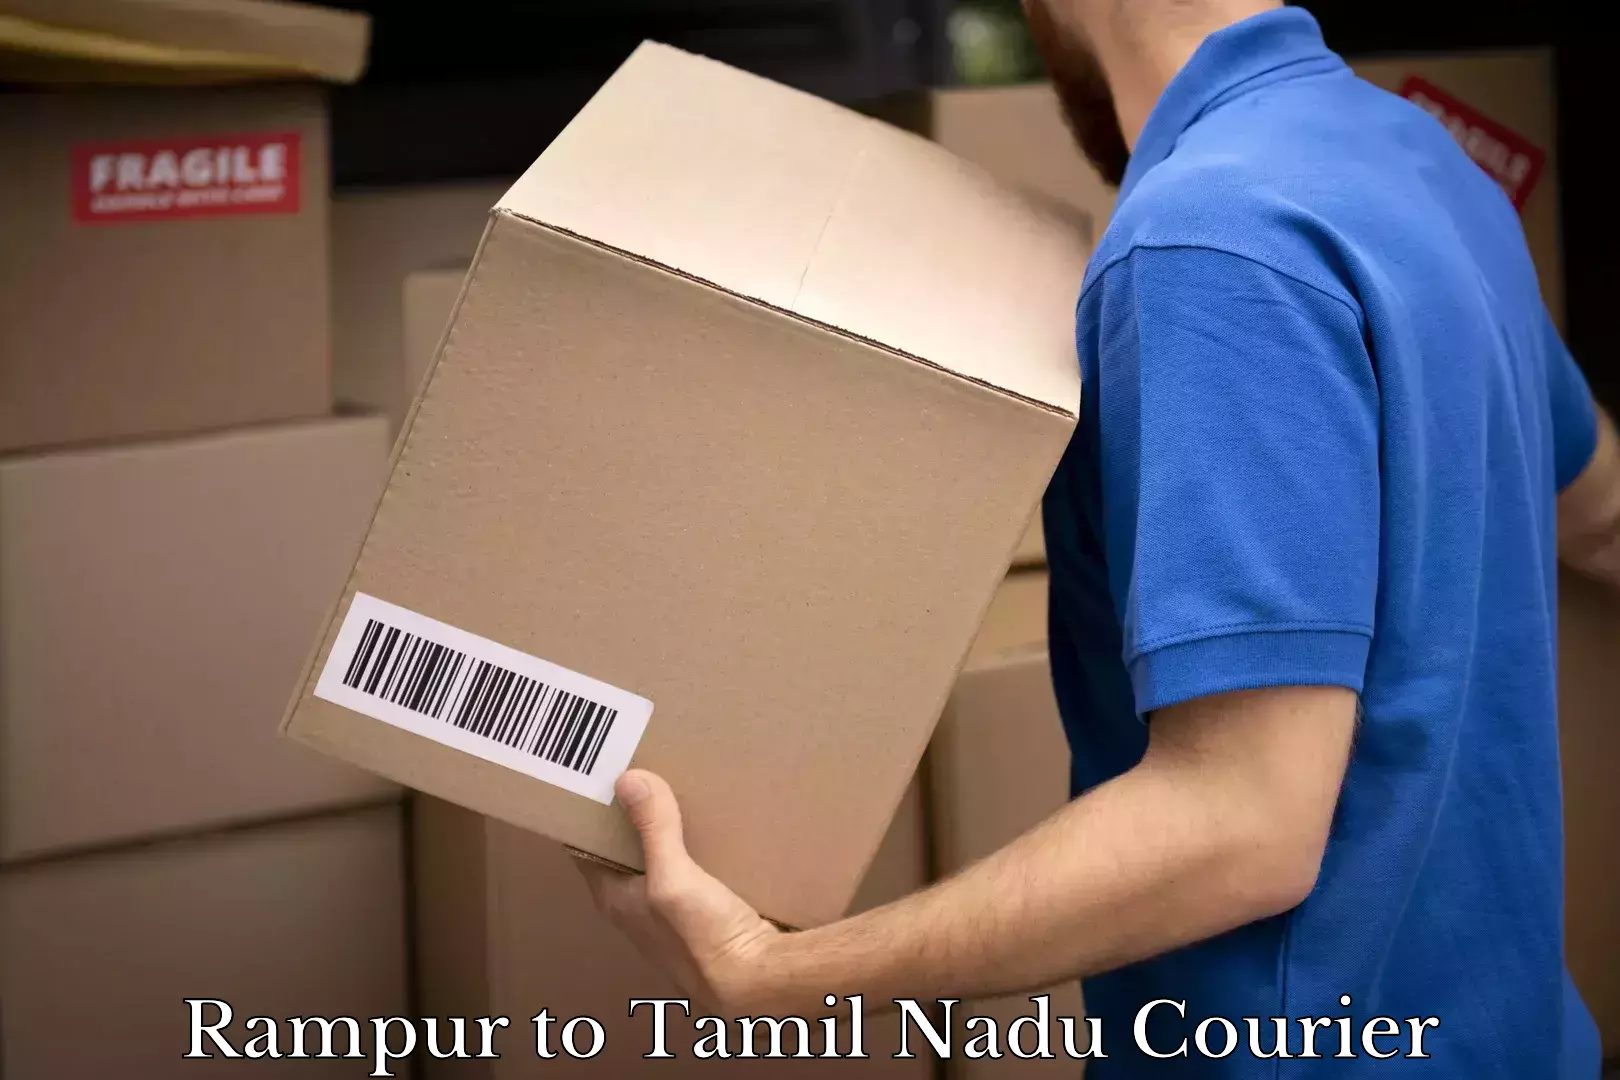 Local delivery service Rampur to Tamil Nadu